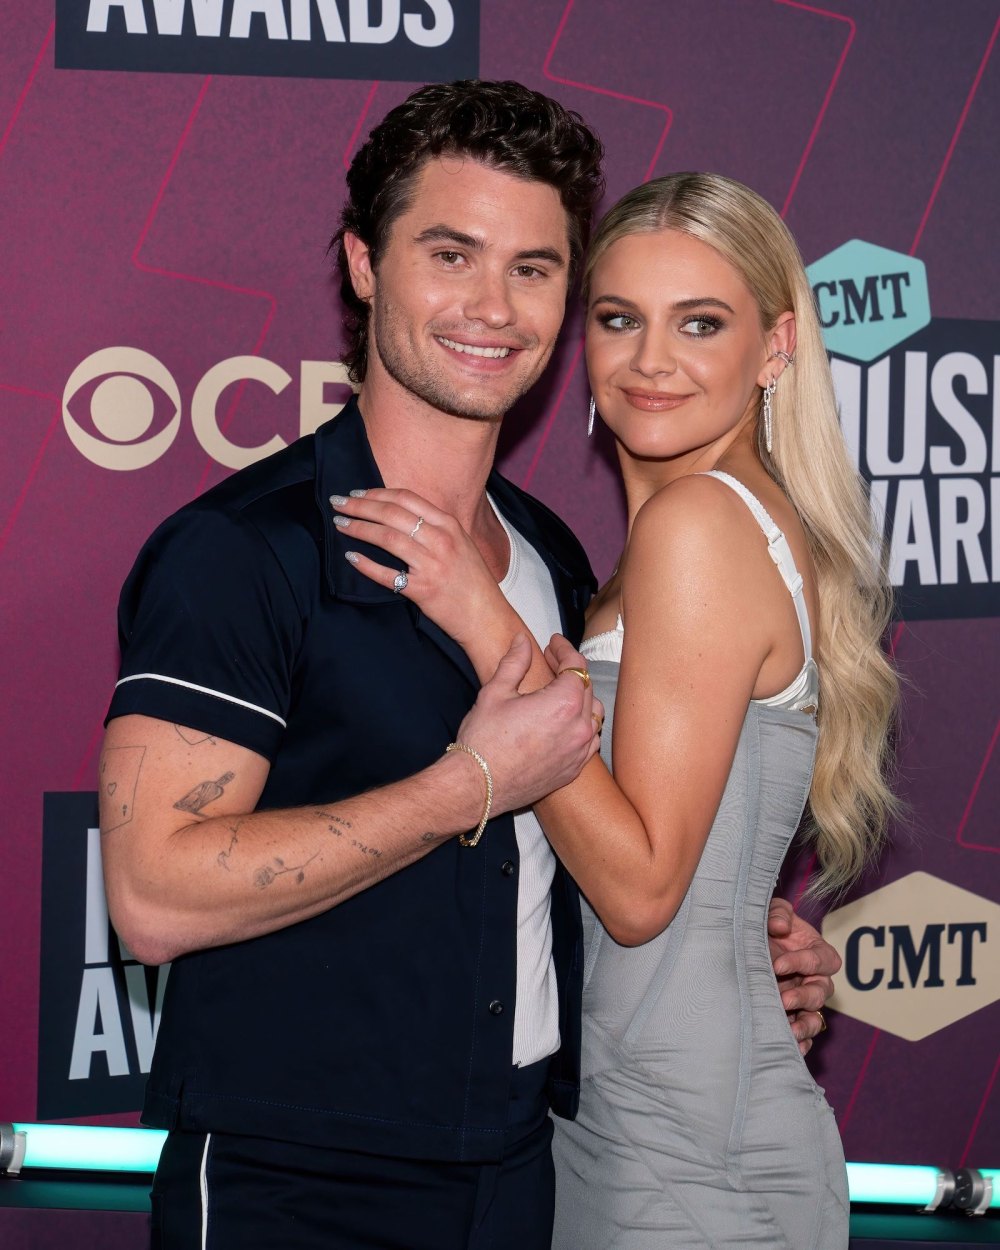 Kelsea Ballerini Runs Off Stage to Make Out With Chase Stokes During Concert